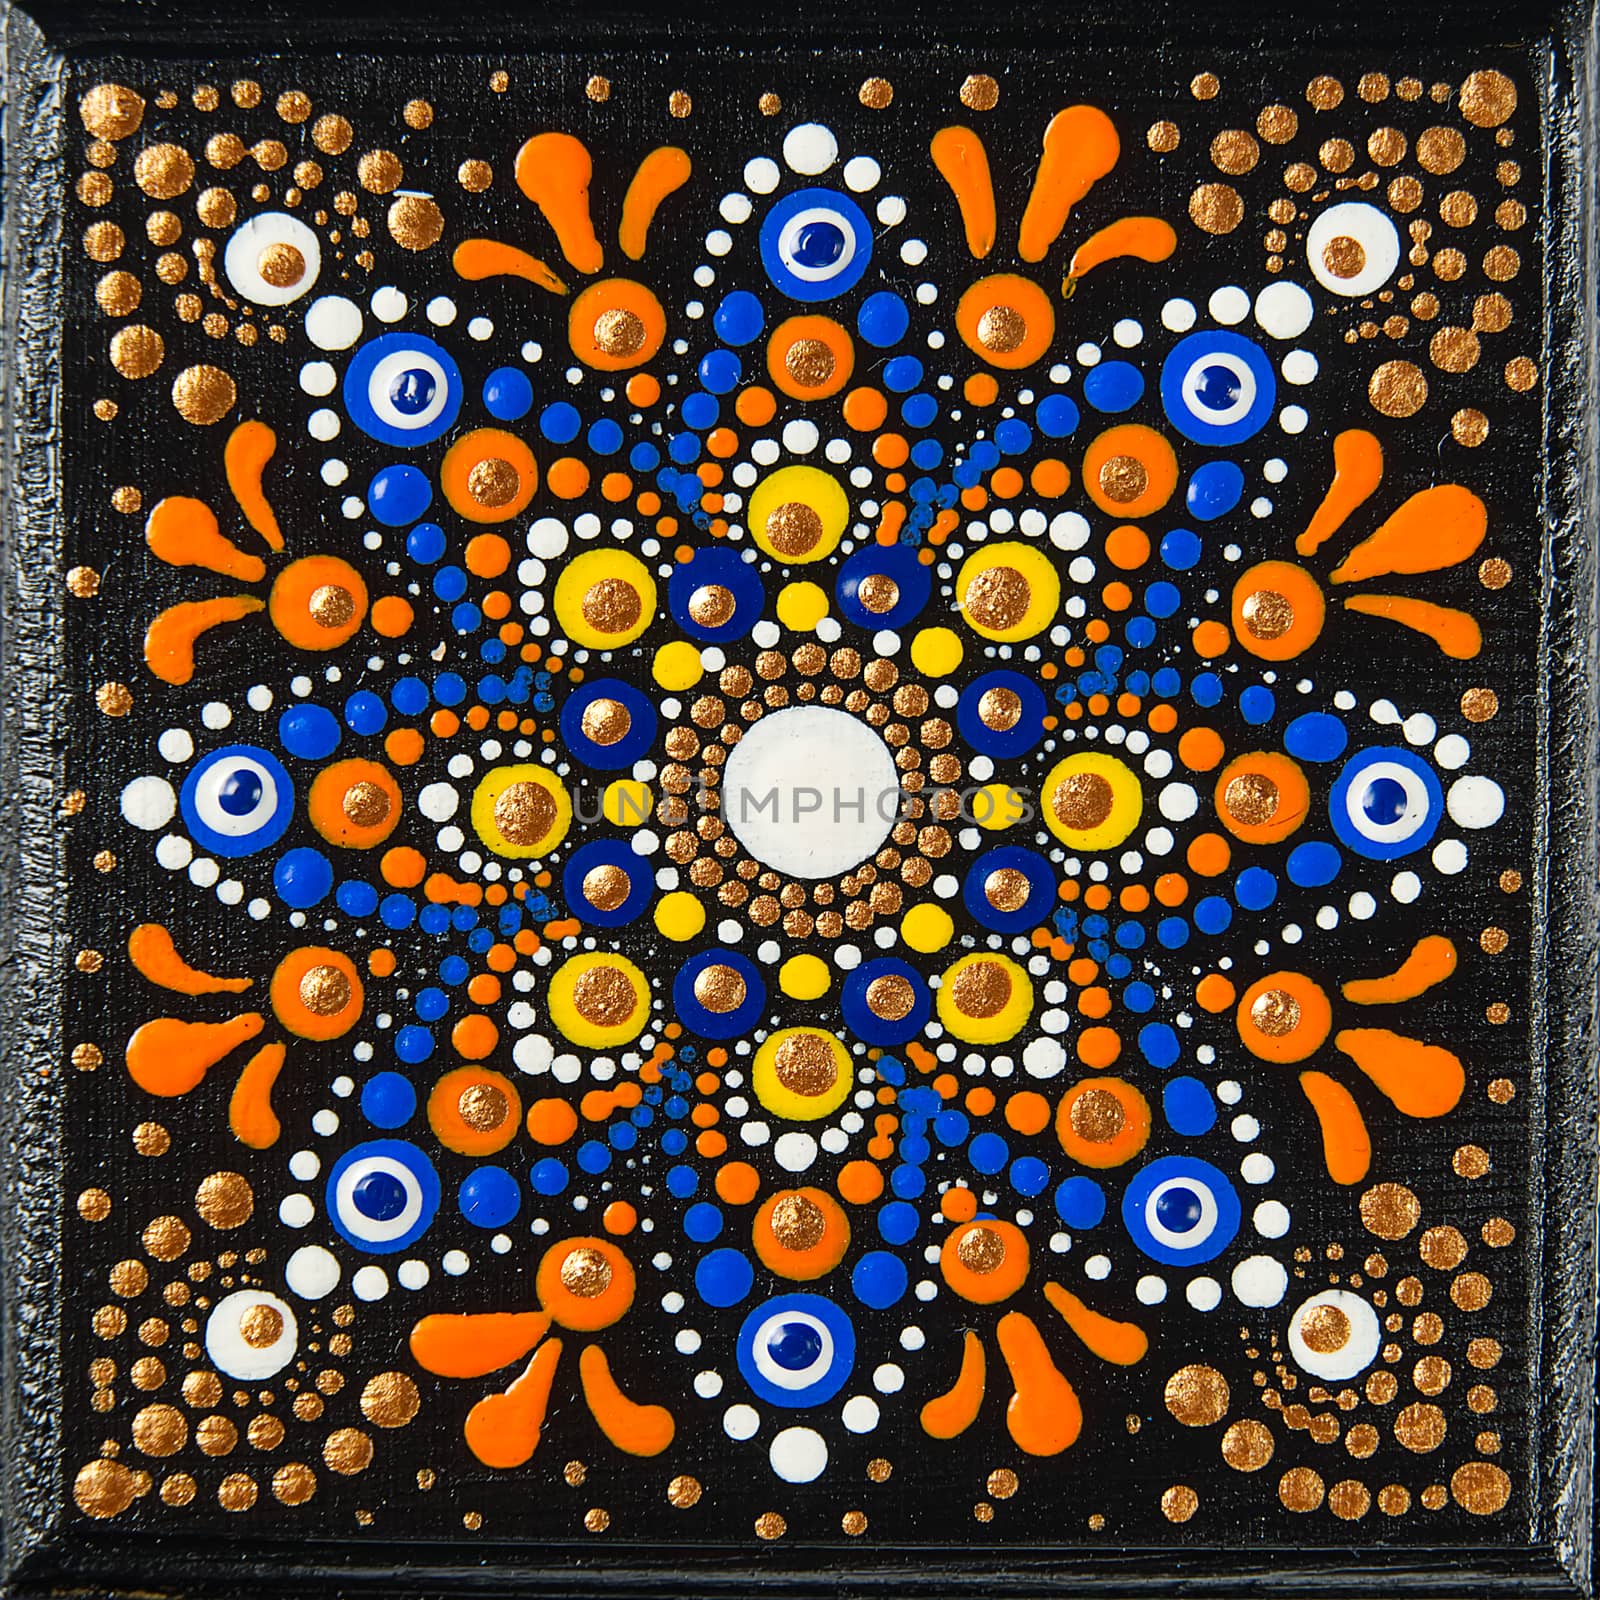 Mandala dot art painting on wood tiles. Beautiful mandala hand painted by colorful dots on black wood. National patterns with acrylic paints, handwork, dot painting. Abstract dotted background. by PhotoTime